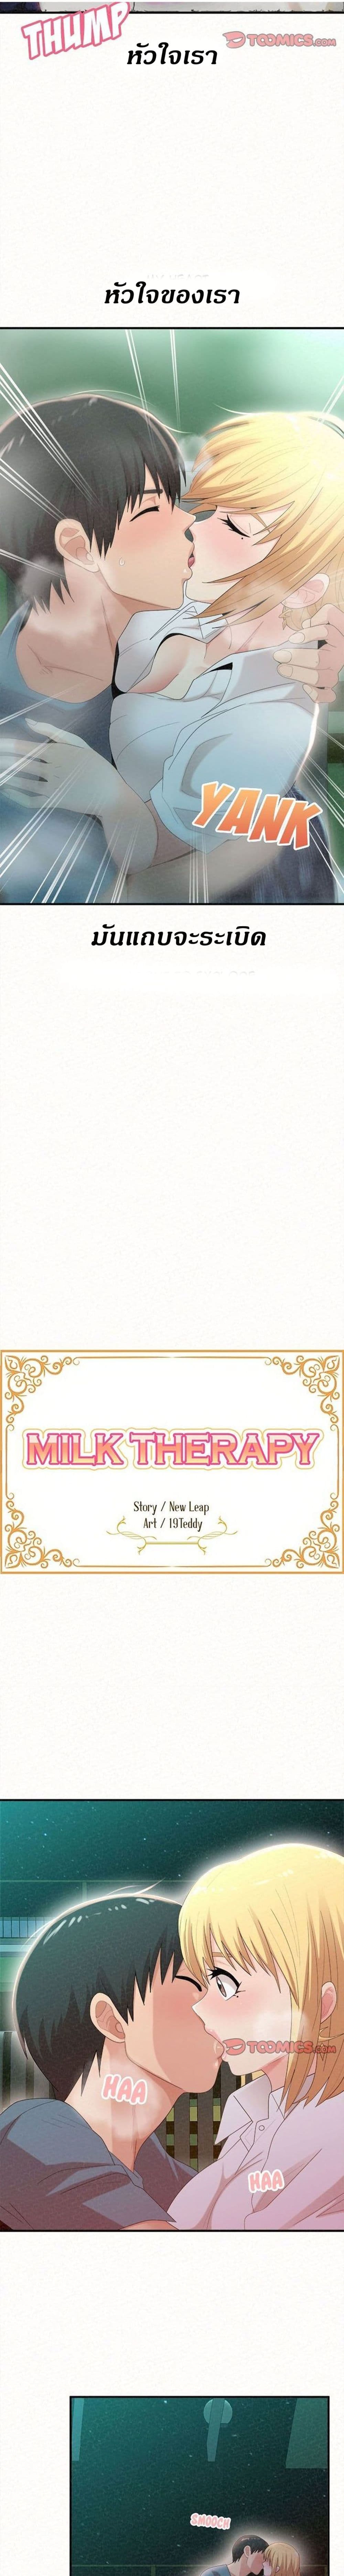 Milk Therapy04